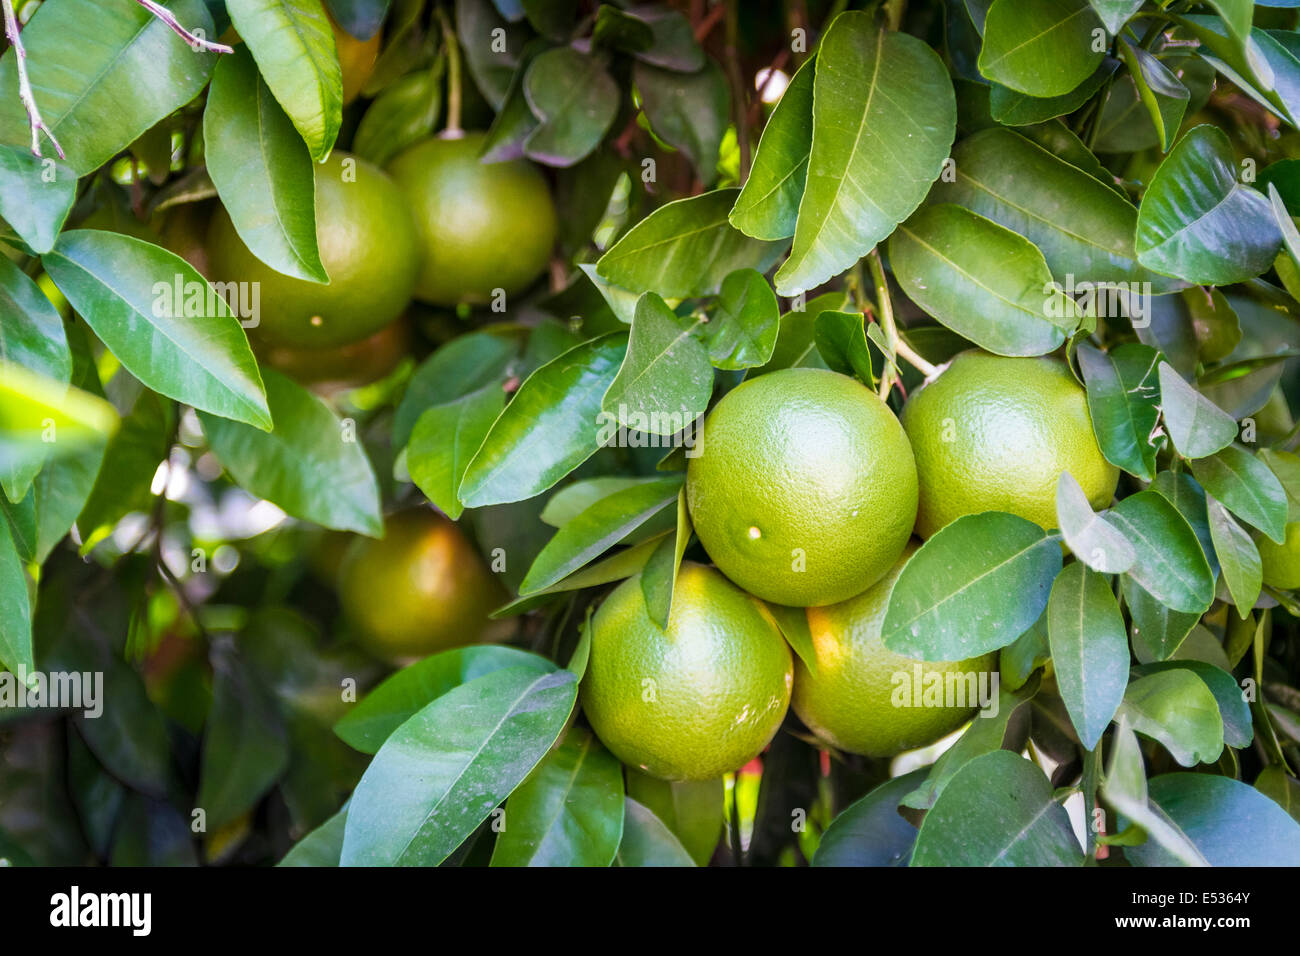 Green immature oranges on a tree in Alta Loma California a historic citrus growing area of Southern California Stock Photo